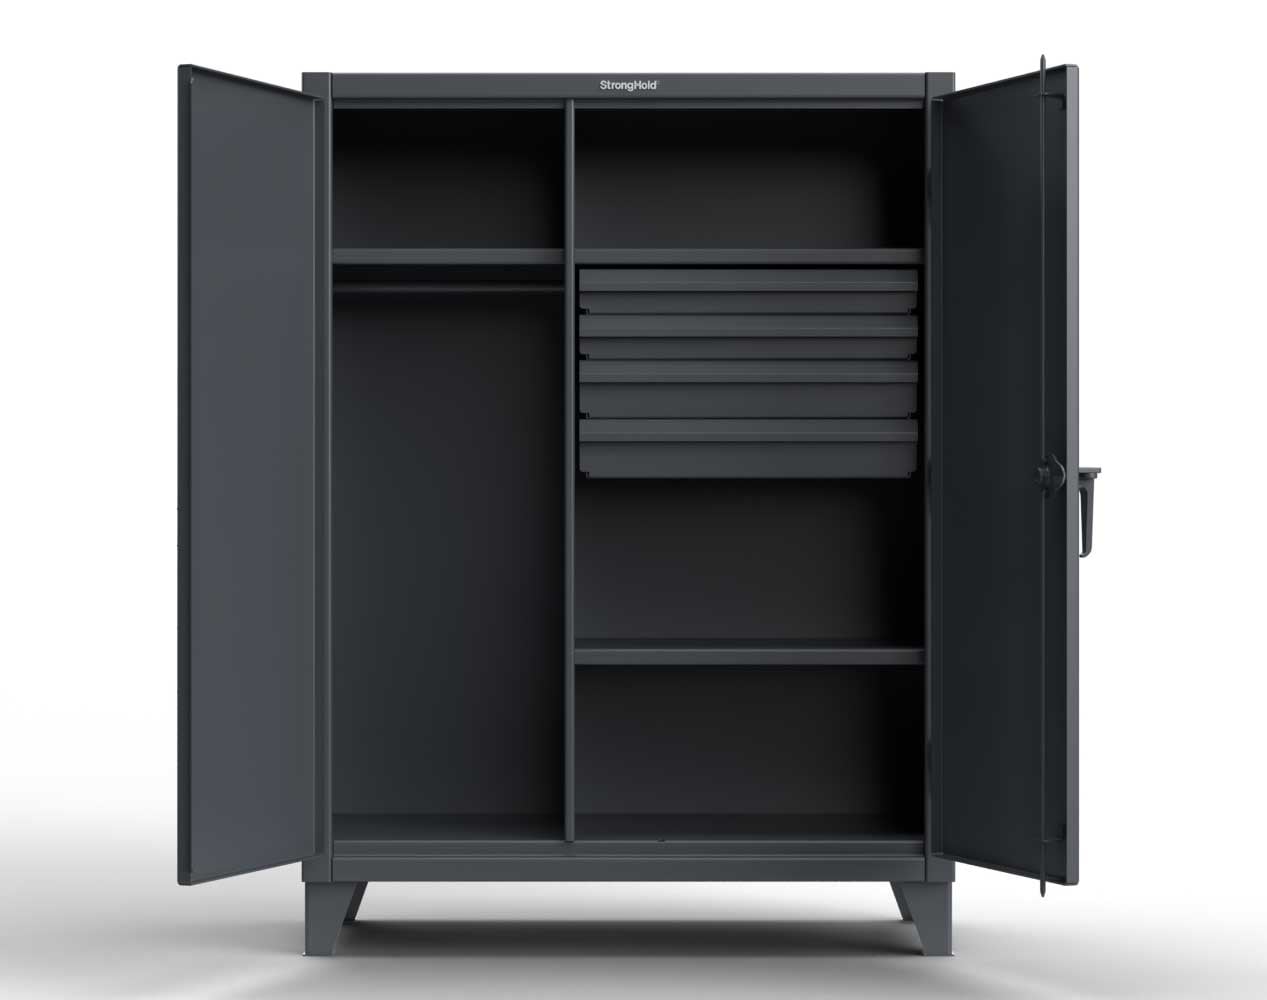 Extreme Duty 12 GA Uniform Cabinet with 4 Drawers, 4 Shelves - 36 In. W x 24 In. D x 78 In. H